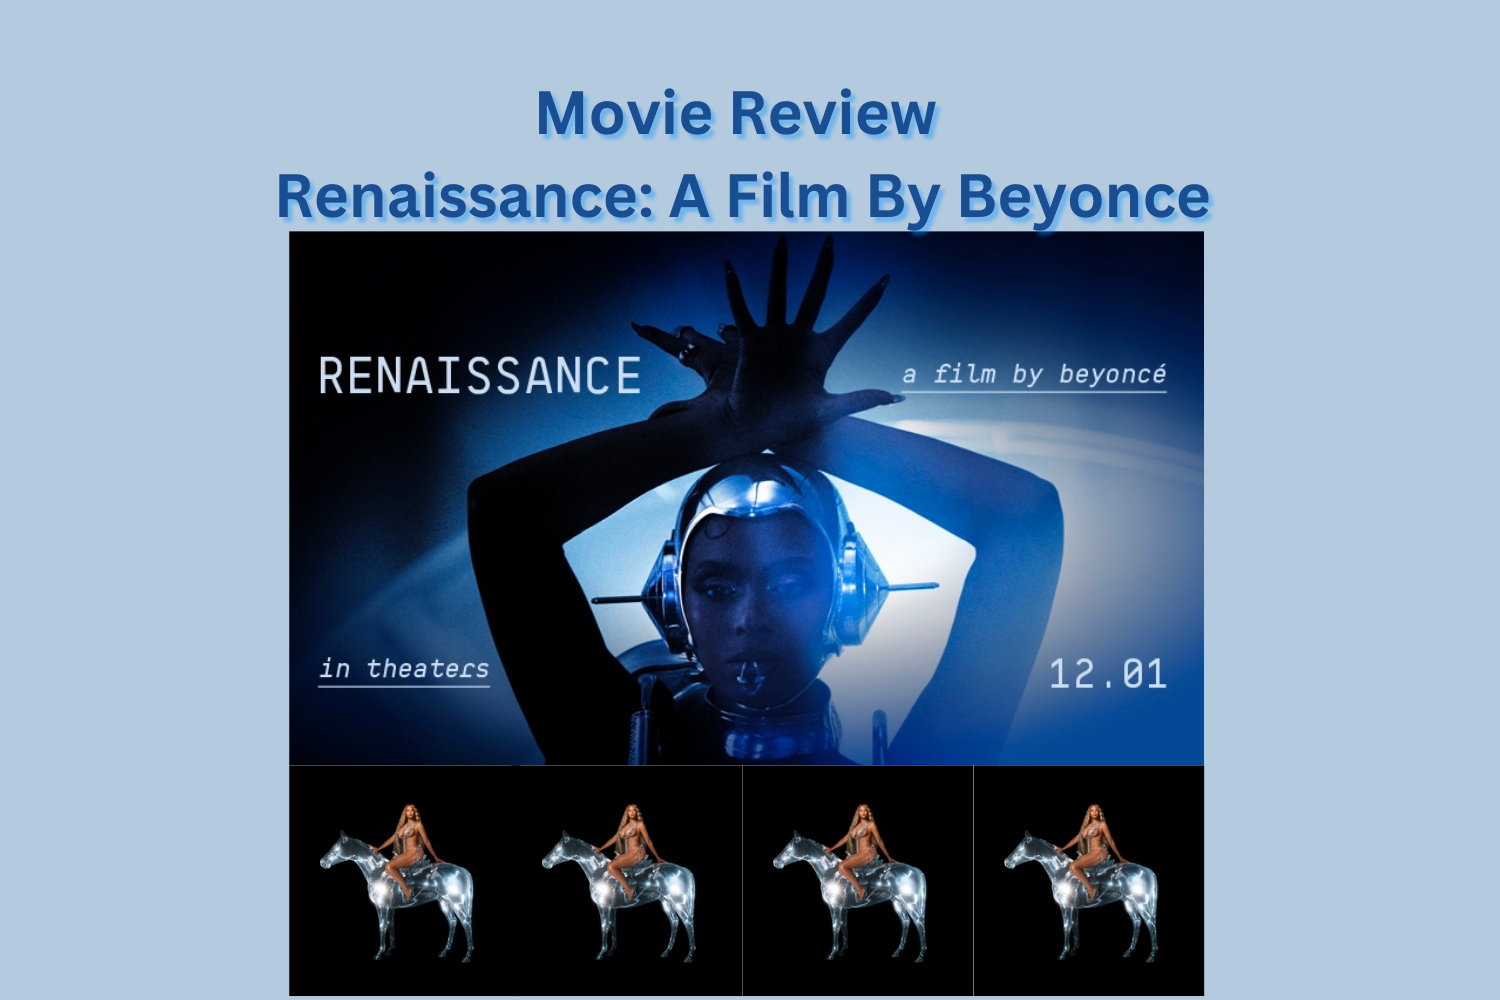 Renaissance: A Film by Beyoncé takes viewers on a journey of fun, hard work, and liberation in the film.